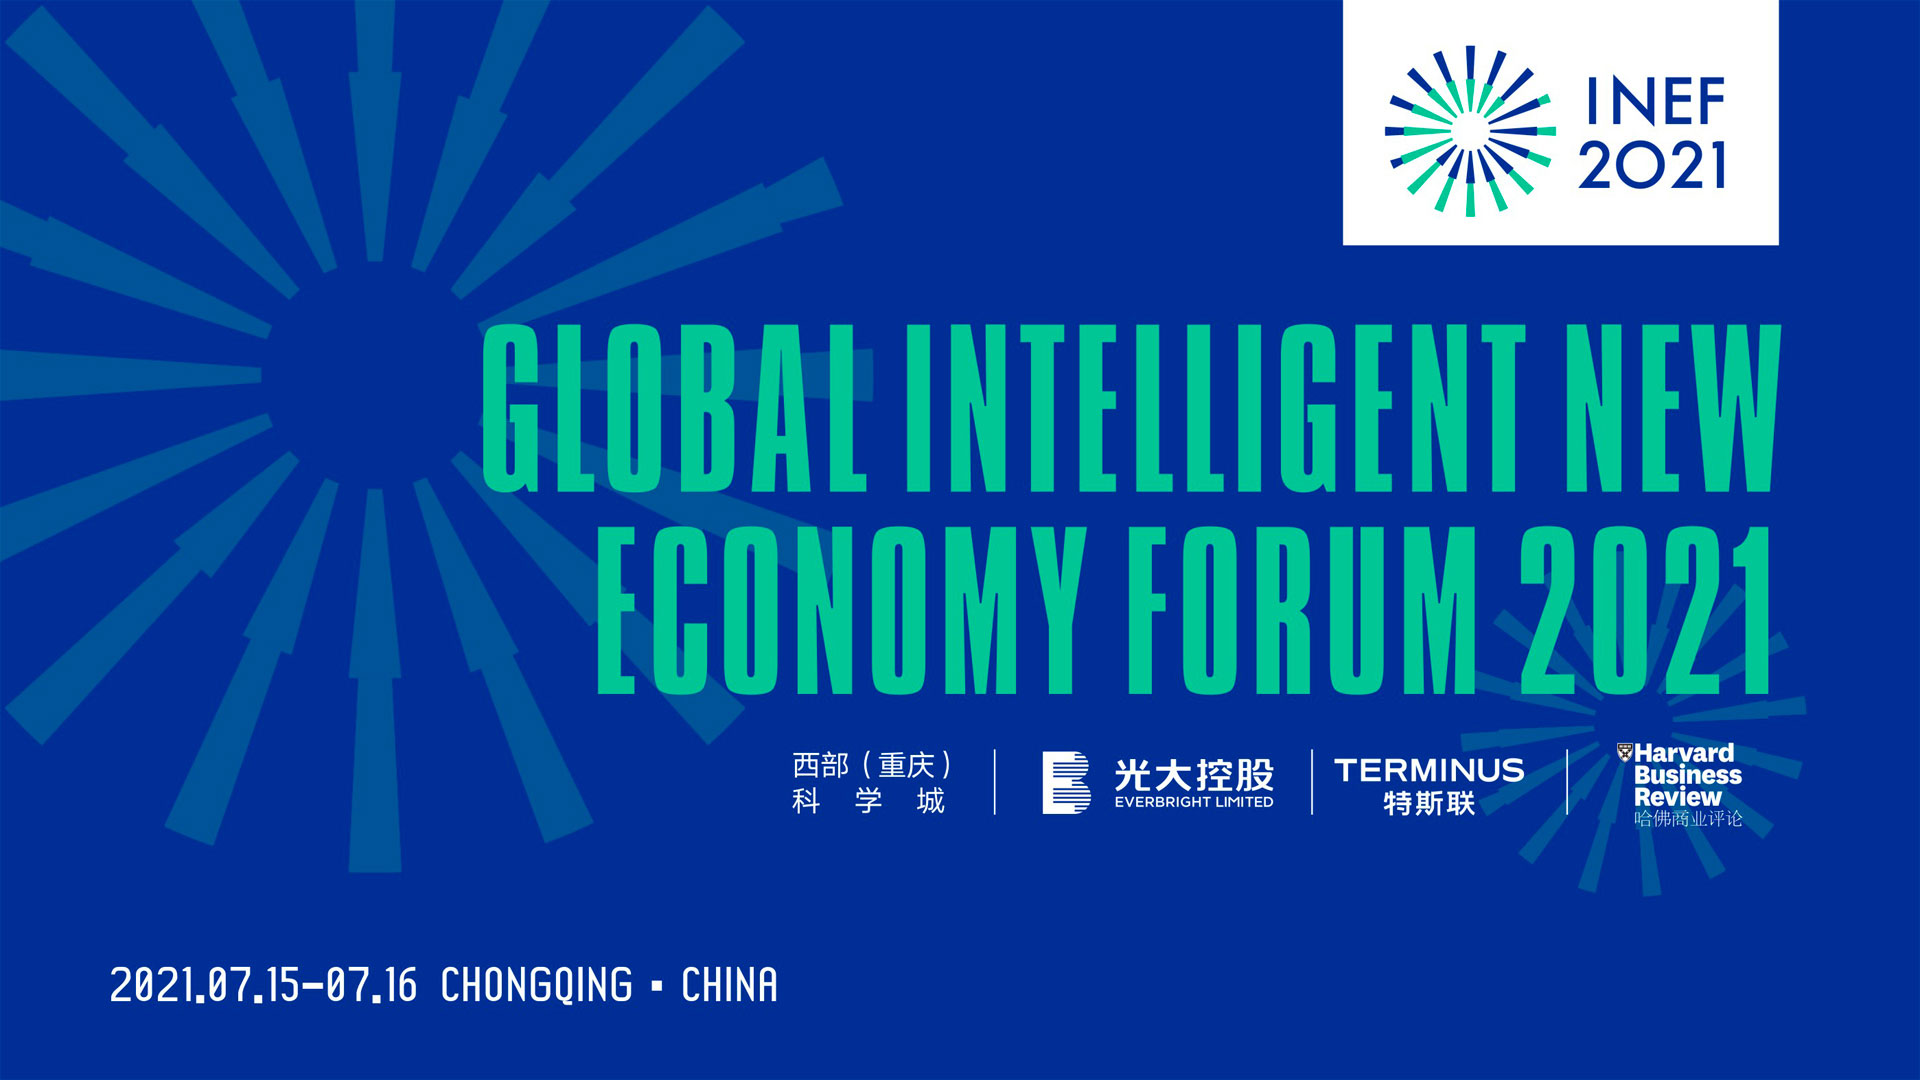 Global Intelligent New-Economy Forum 2021 launches on July 15